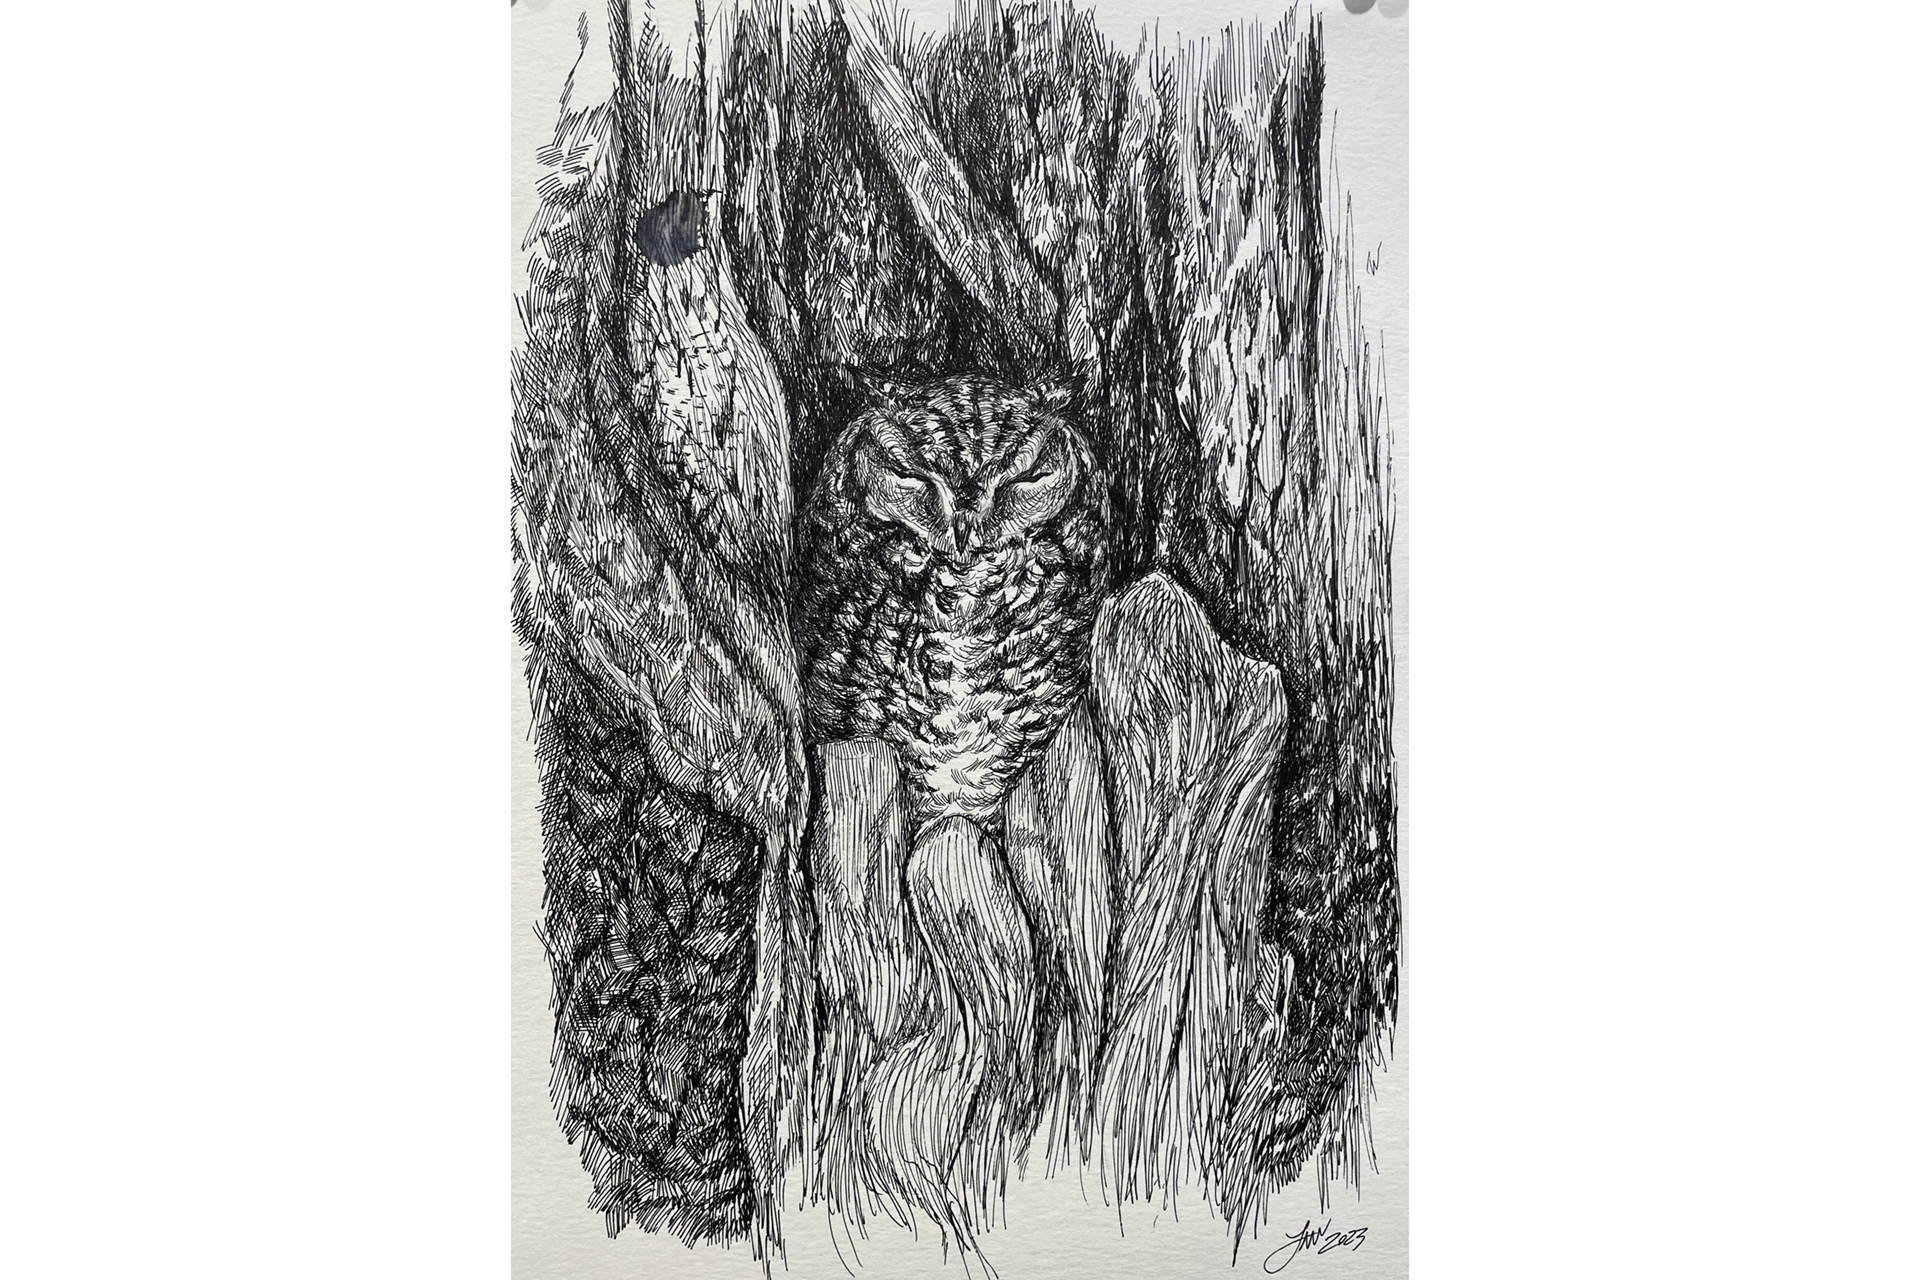 Drawing of an owl sleeping in a tree